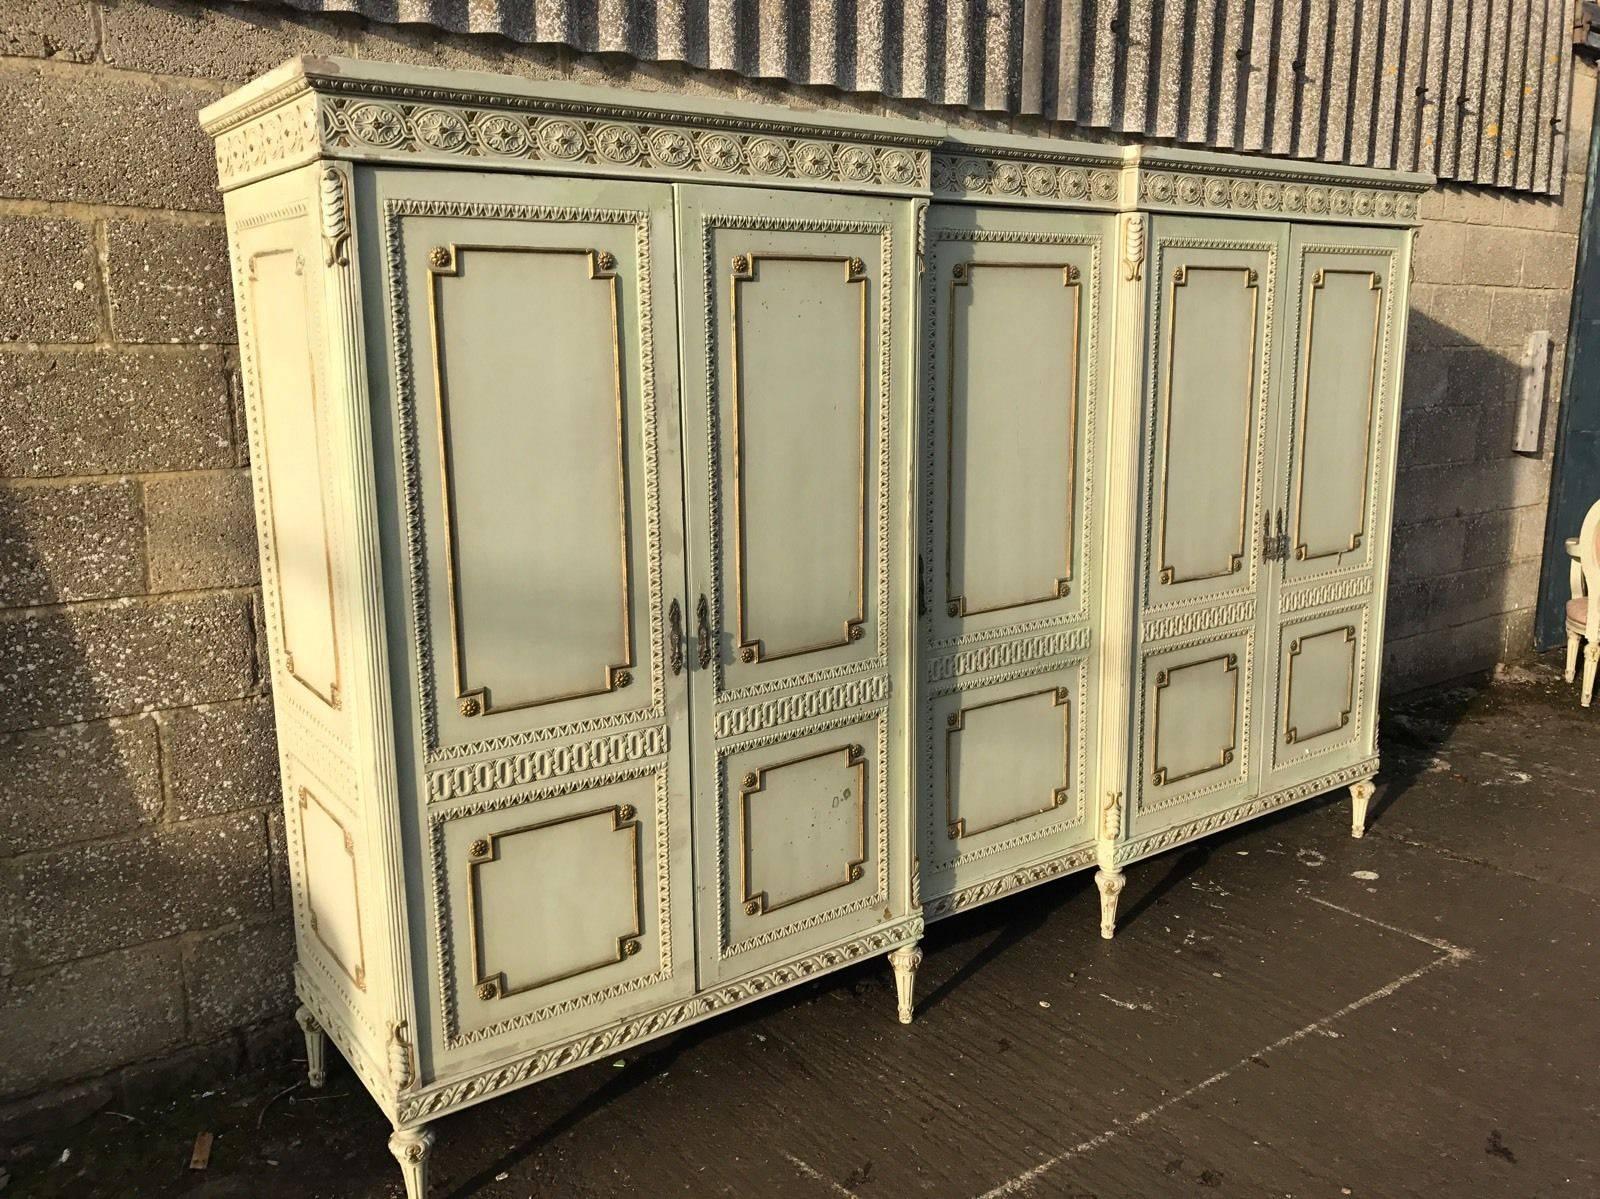 This is a very rare five-door French armoire. Very hard to come by, rarely seen for sale anywhere.

With its original paint and original floral paint work, it really is a one off. 

Splits down in to several sections for ease of